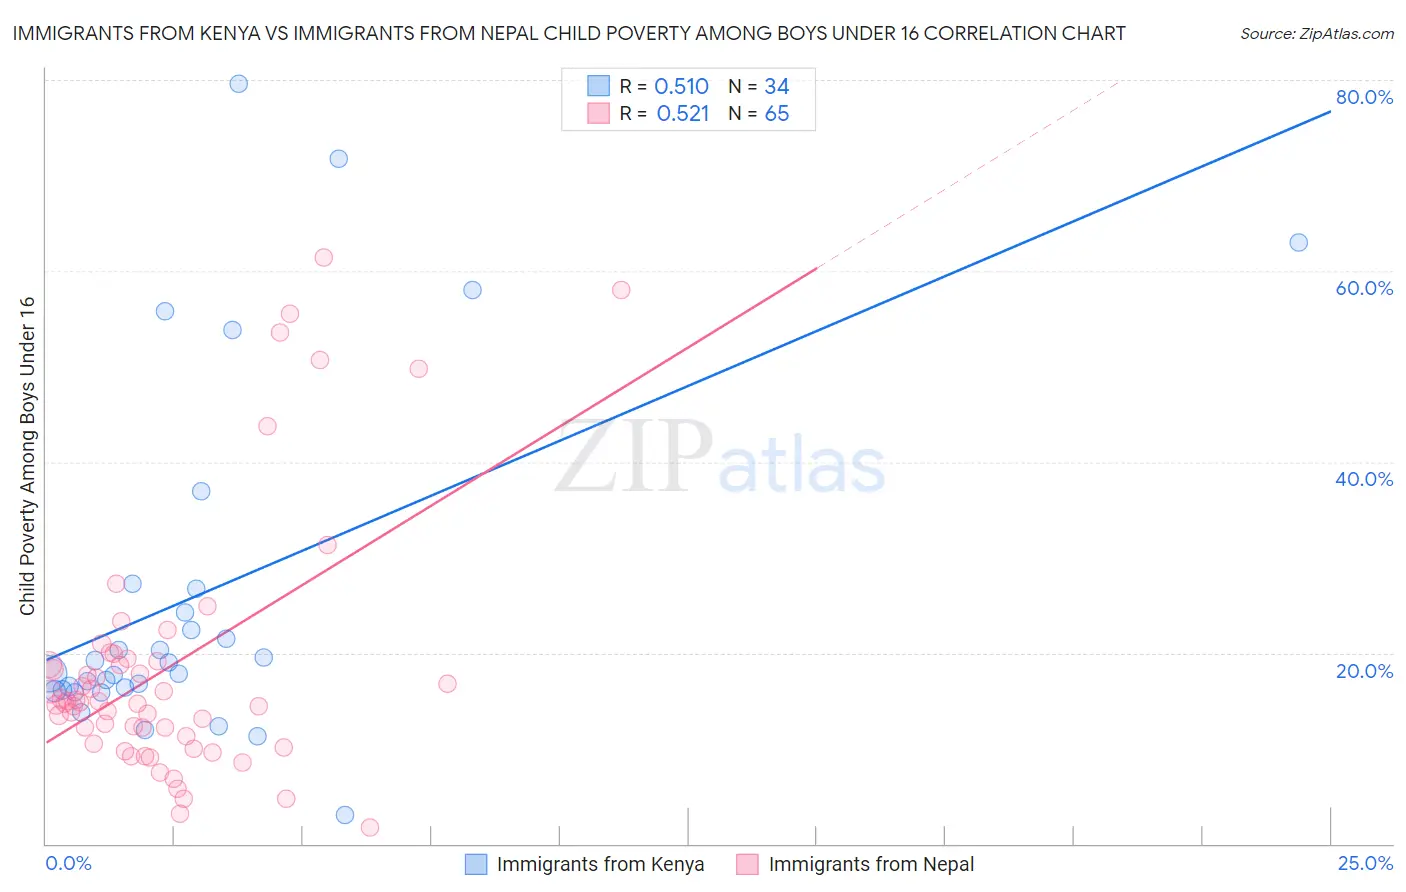 Immigrants from Kenya vs Immigrants from Nepal Child Poverty Among Boys Under 16